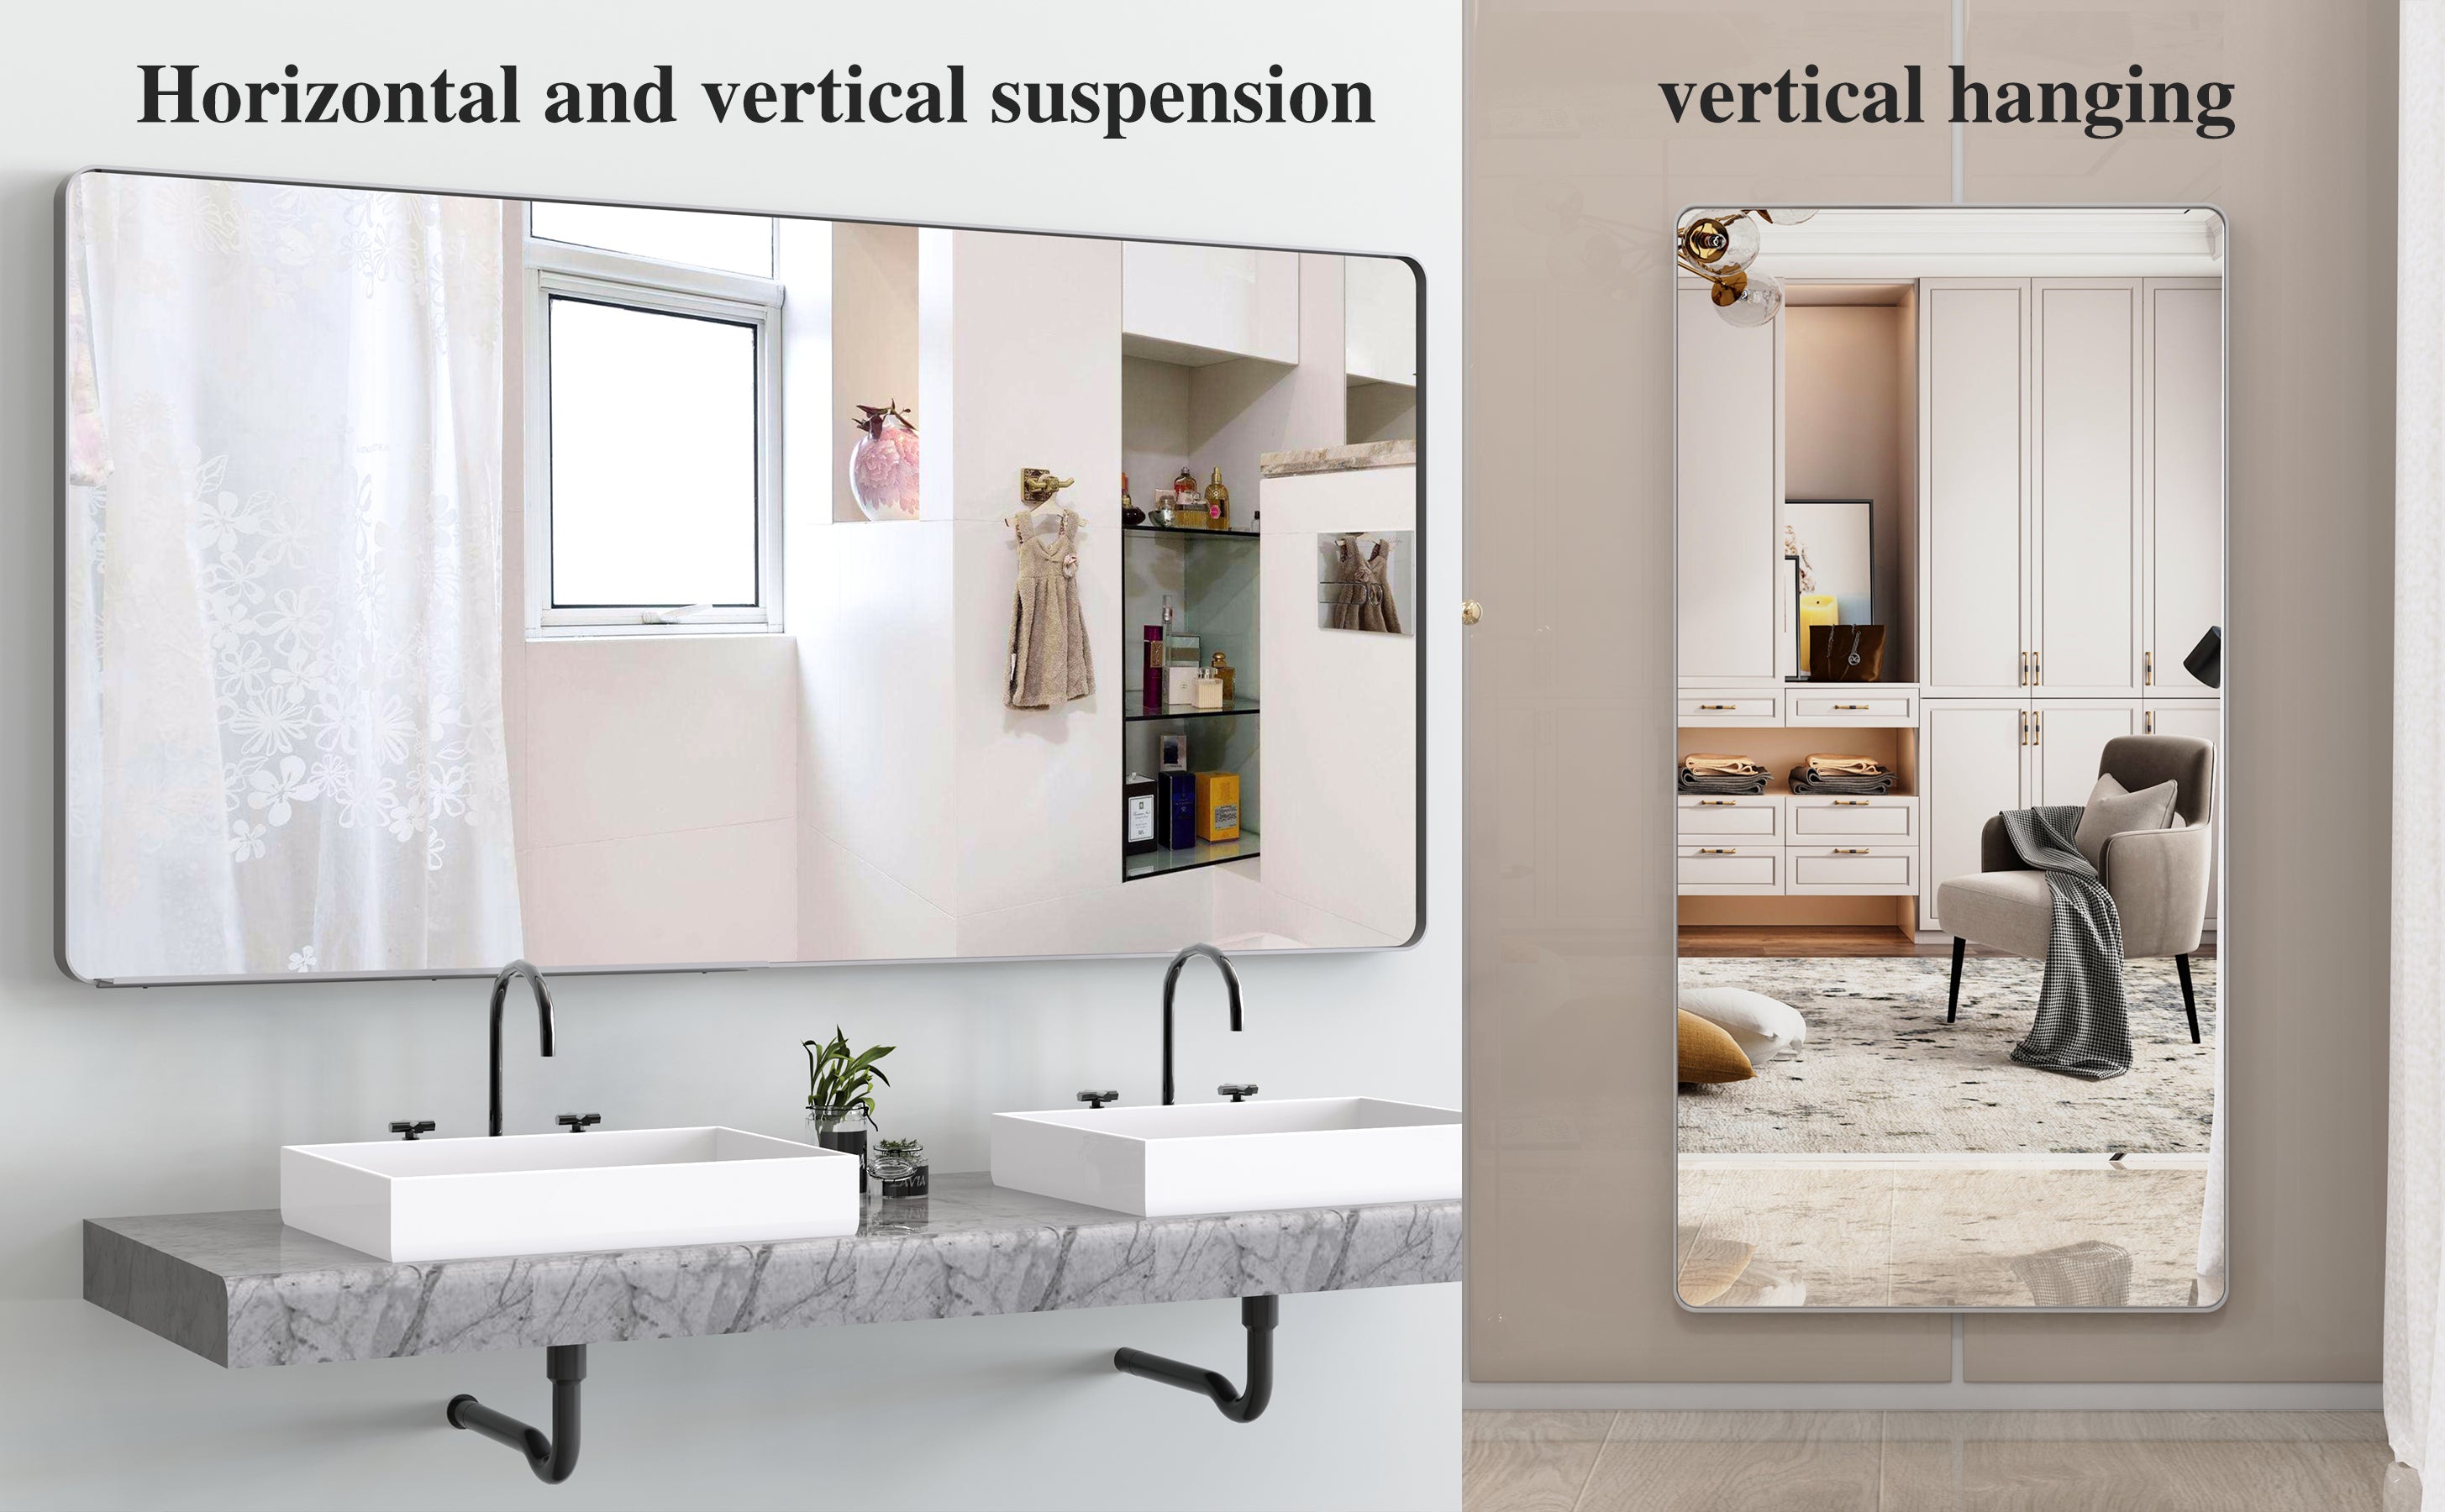 Oversized Bathroom Mirror with Mobile Tray Wall Mount Mirror,Vertical Horizontal Hanging Aluminum Framed Wall Mirror Full Length Mirror,Full Body Mirror for Bedroom Living Room,Silver,72 x 36 Inches